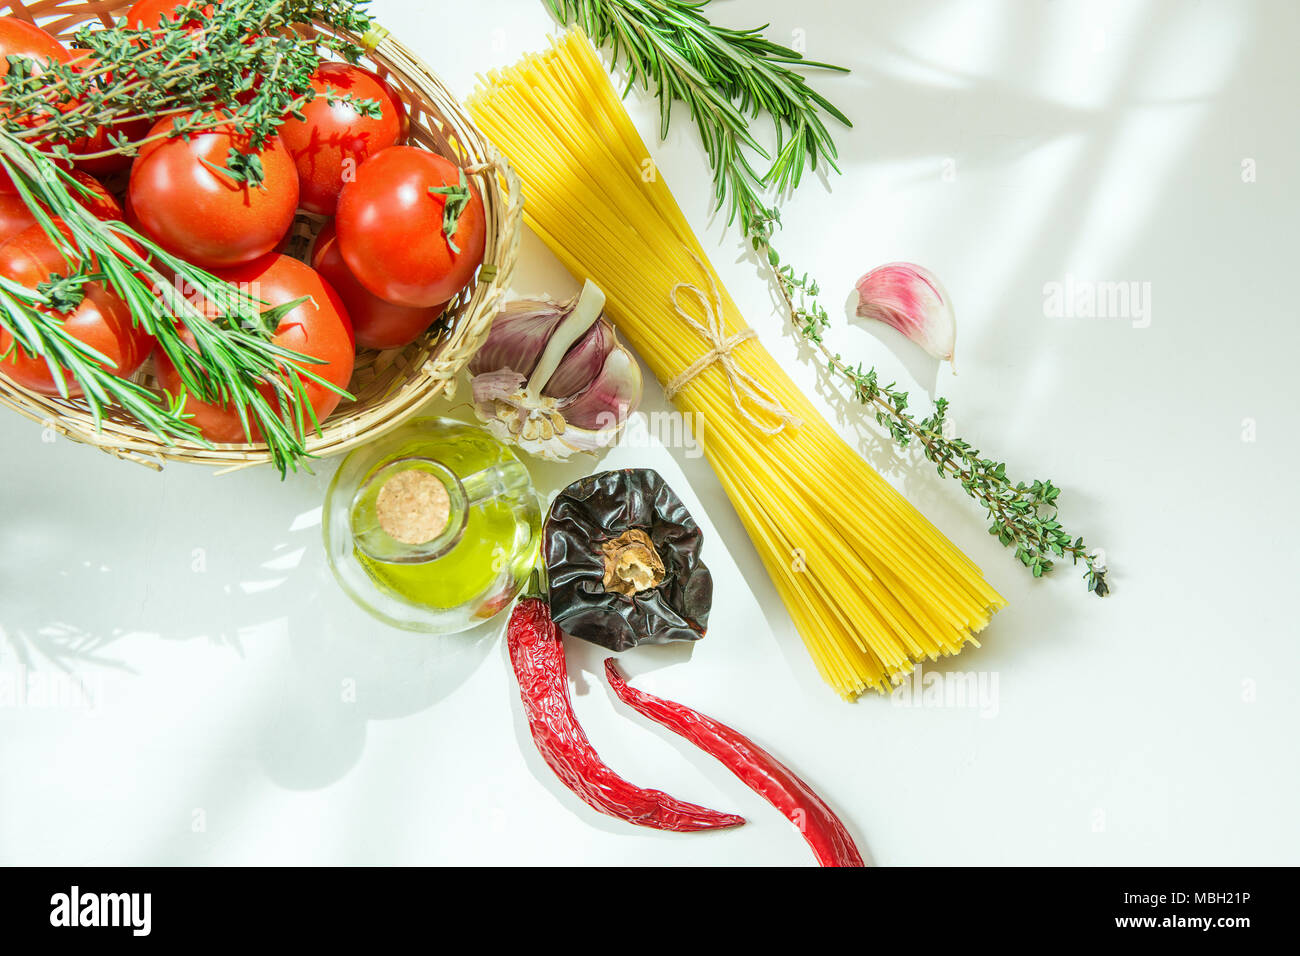 Ripe Organic Tomatoes Herbs Rosemary Thyme in Wicker Basket. Spaghetti Olive Oil in Bottle Hot Peppers Garlic on White Stone Concrete Kitchen Table. S Stock Photo